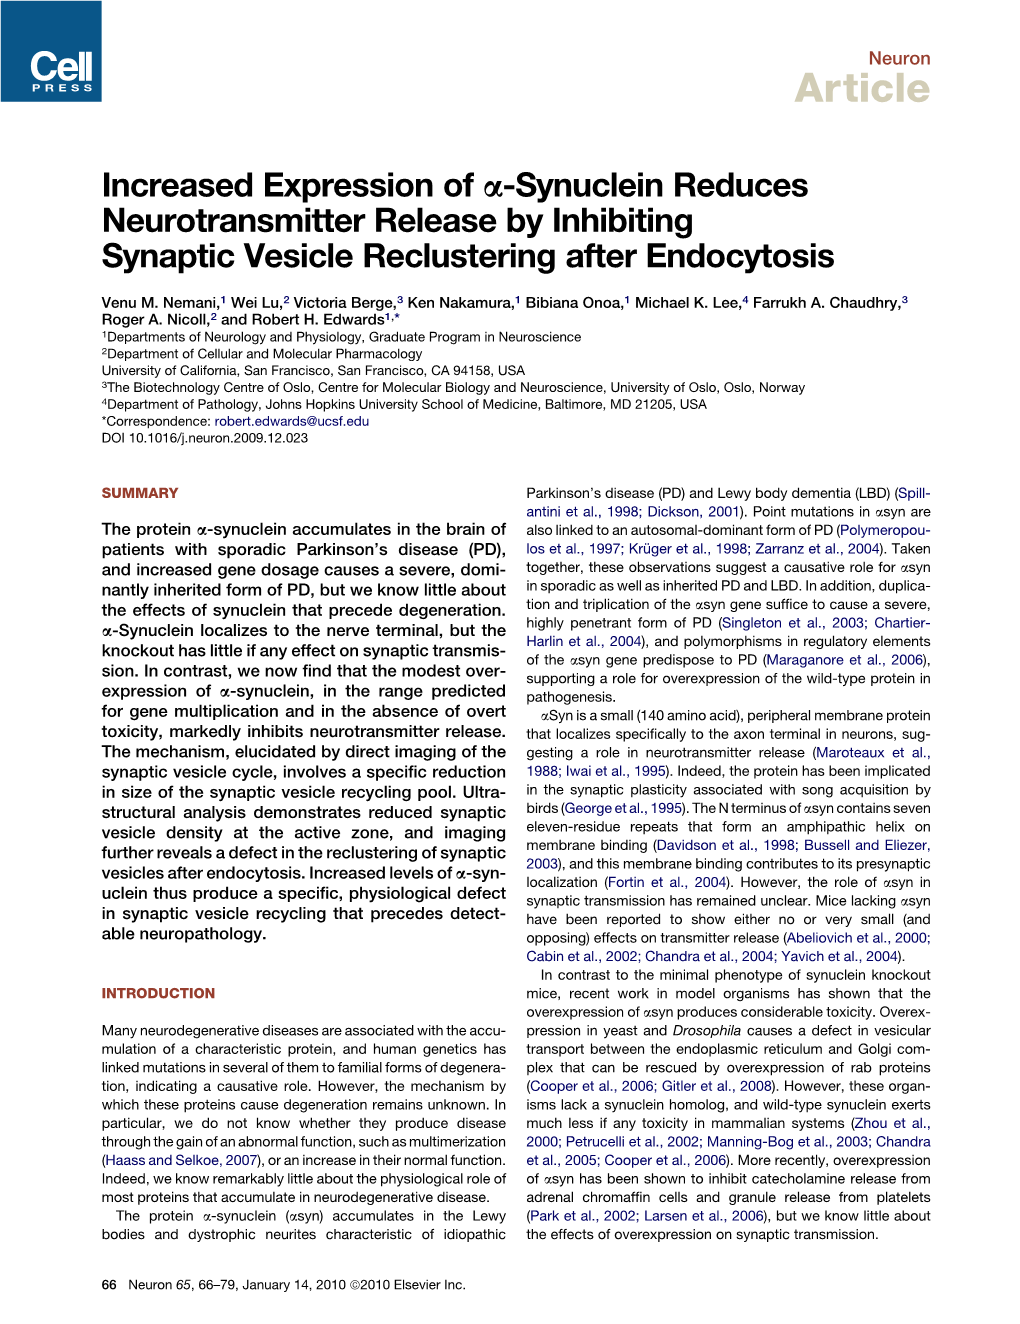 Synuclein Reduces Neurotransmitter Release by Inhibiting Synaptic Vesicle Reclustering After Endocytosis